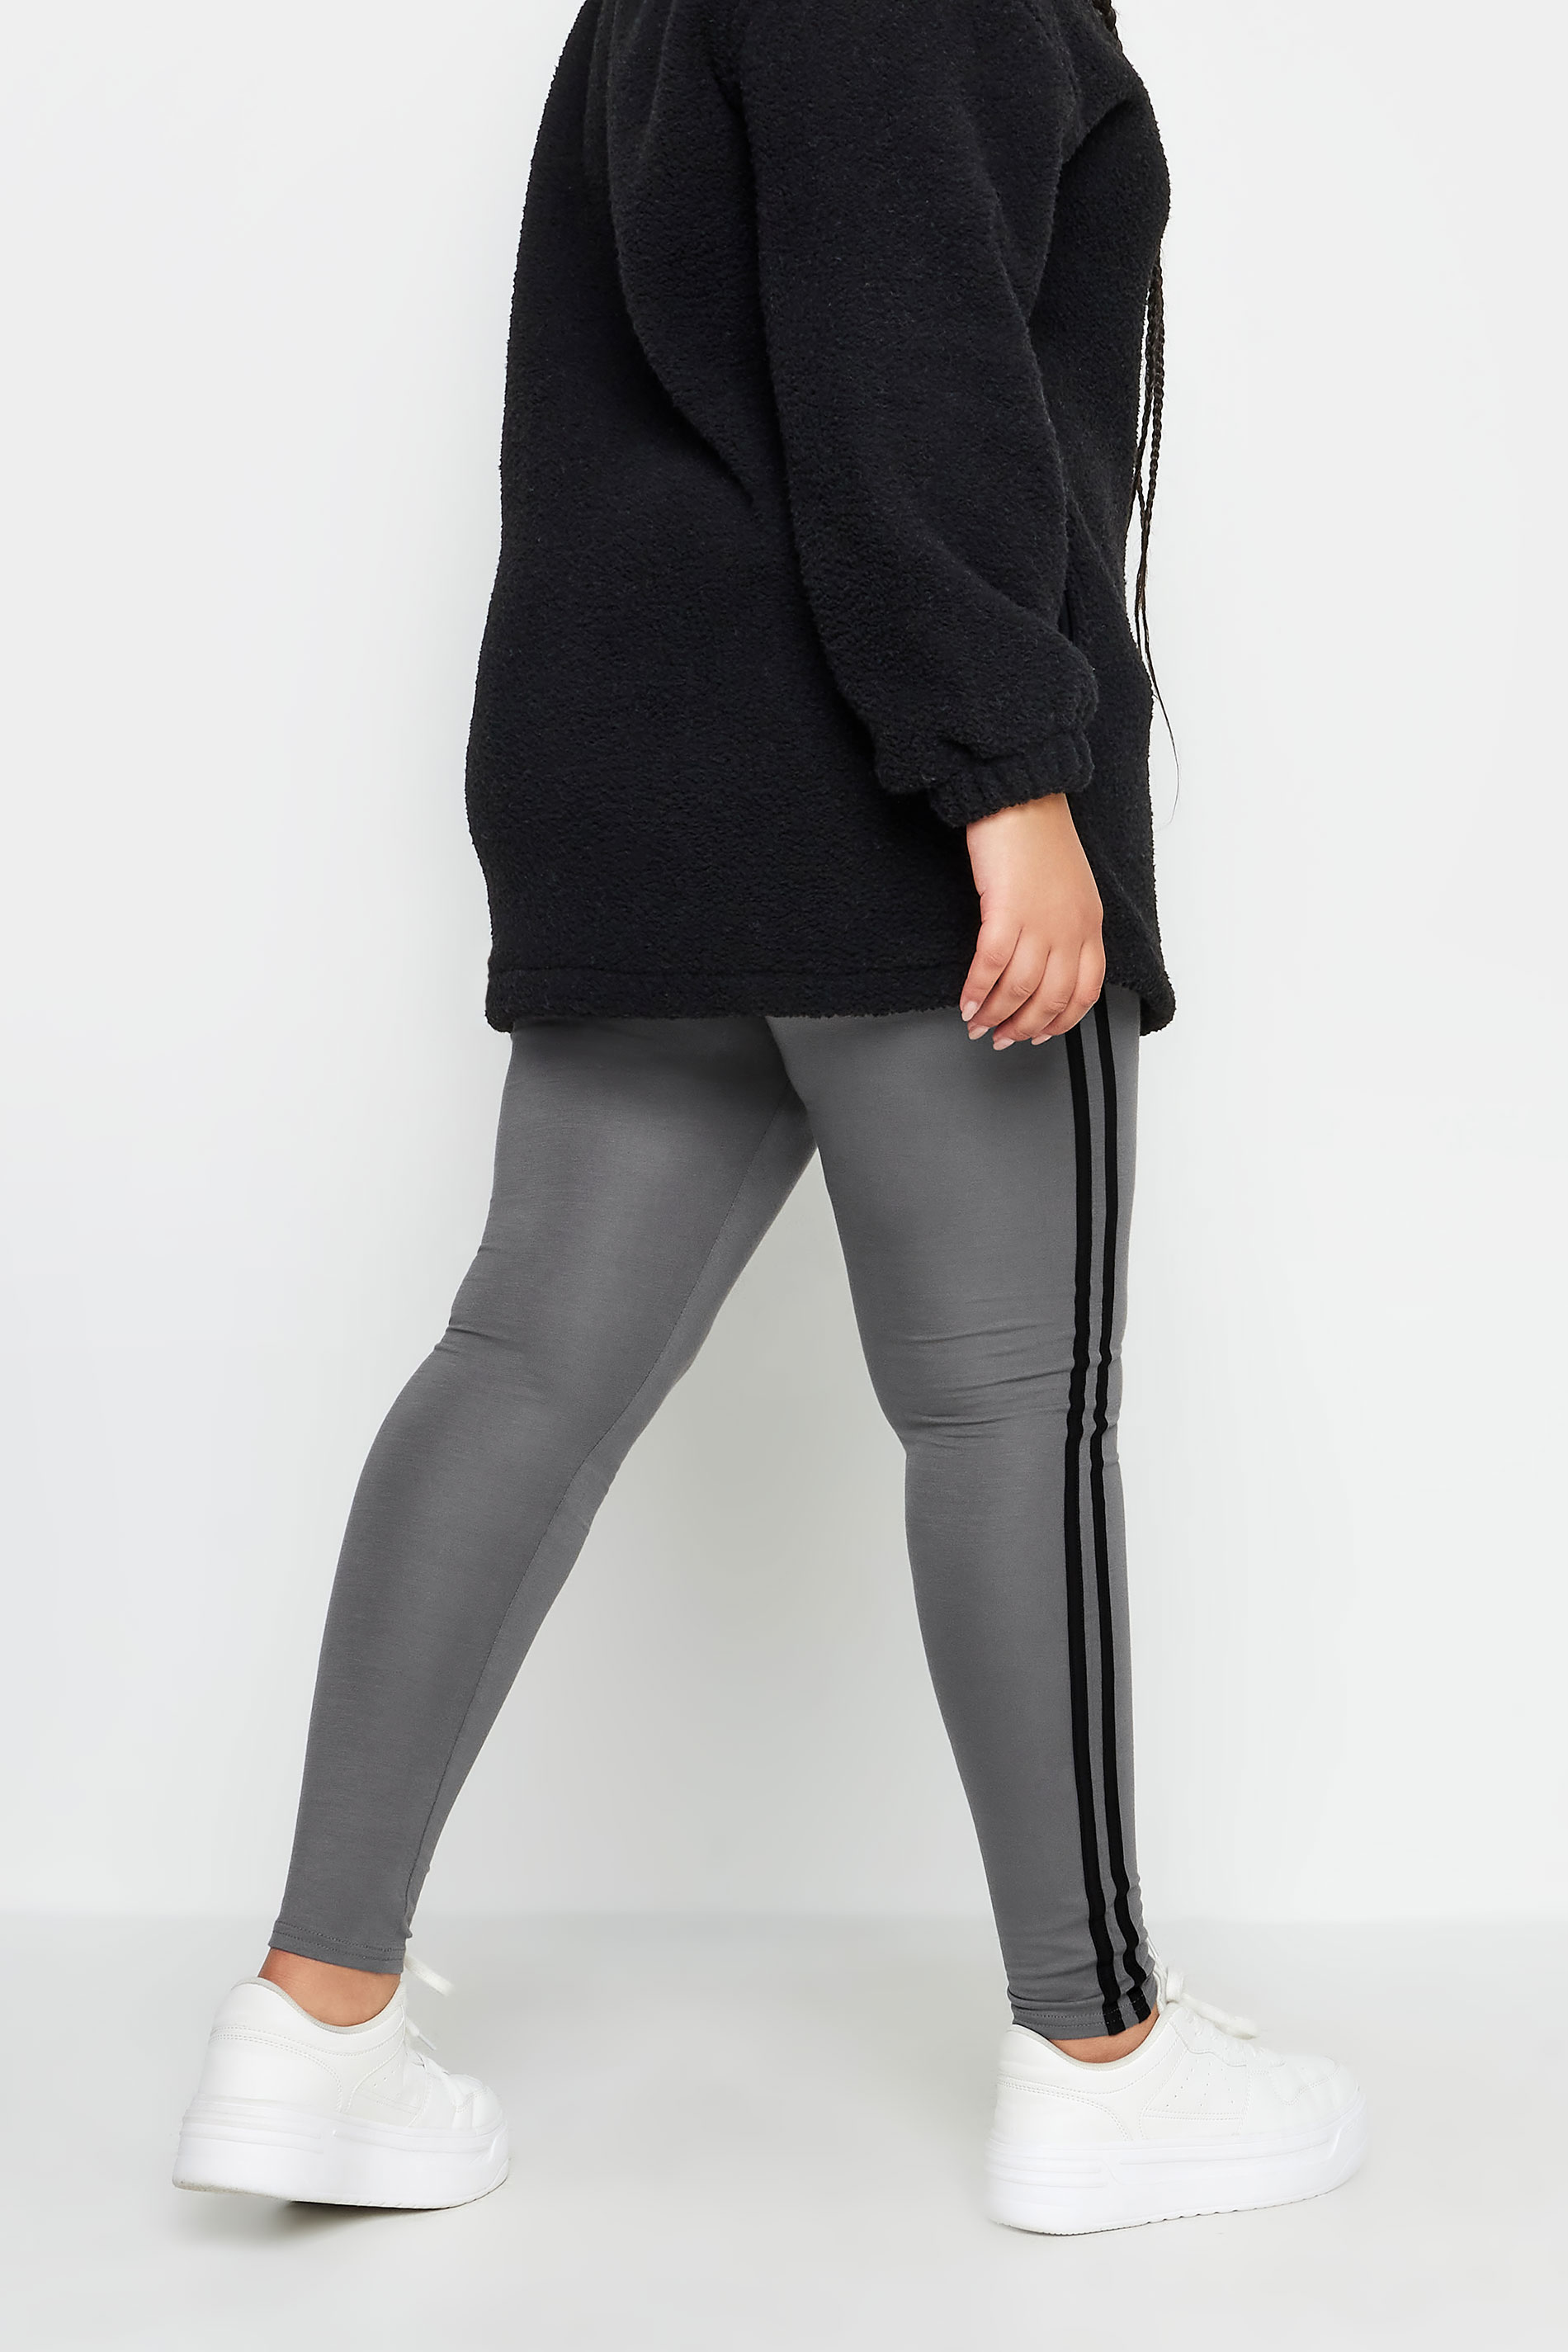 YOURS Plus Size Grey Side Stripe Leggings | Yours Clothing 3